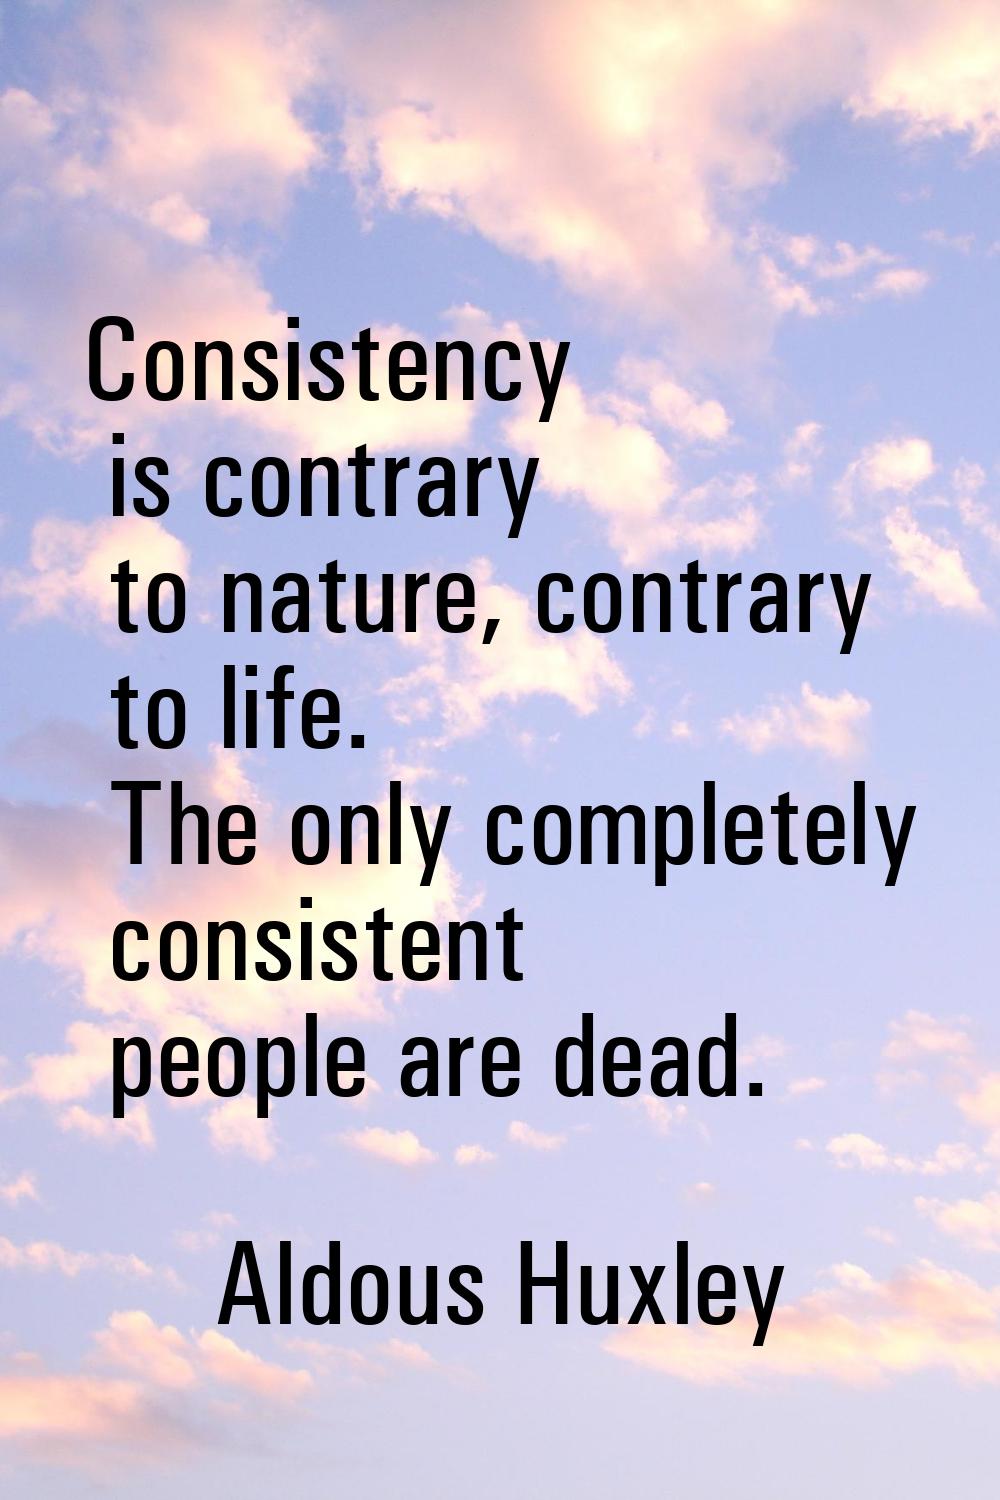 Consistency is contrary to nature, contrary to life. The only completely consistent people are dead